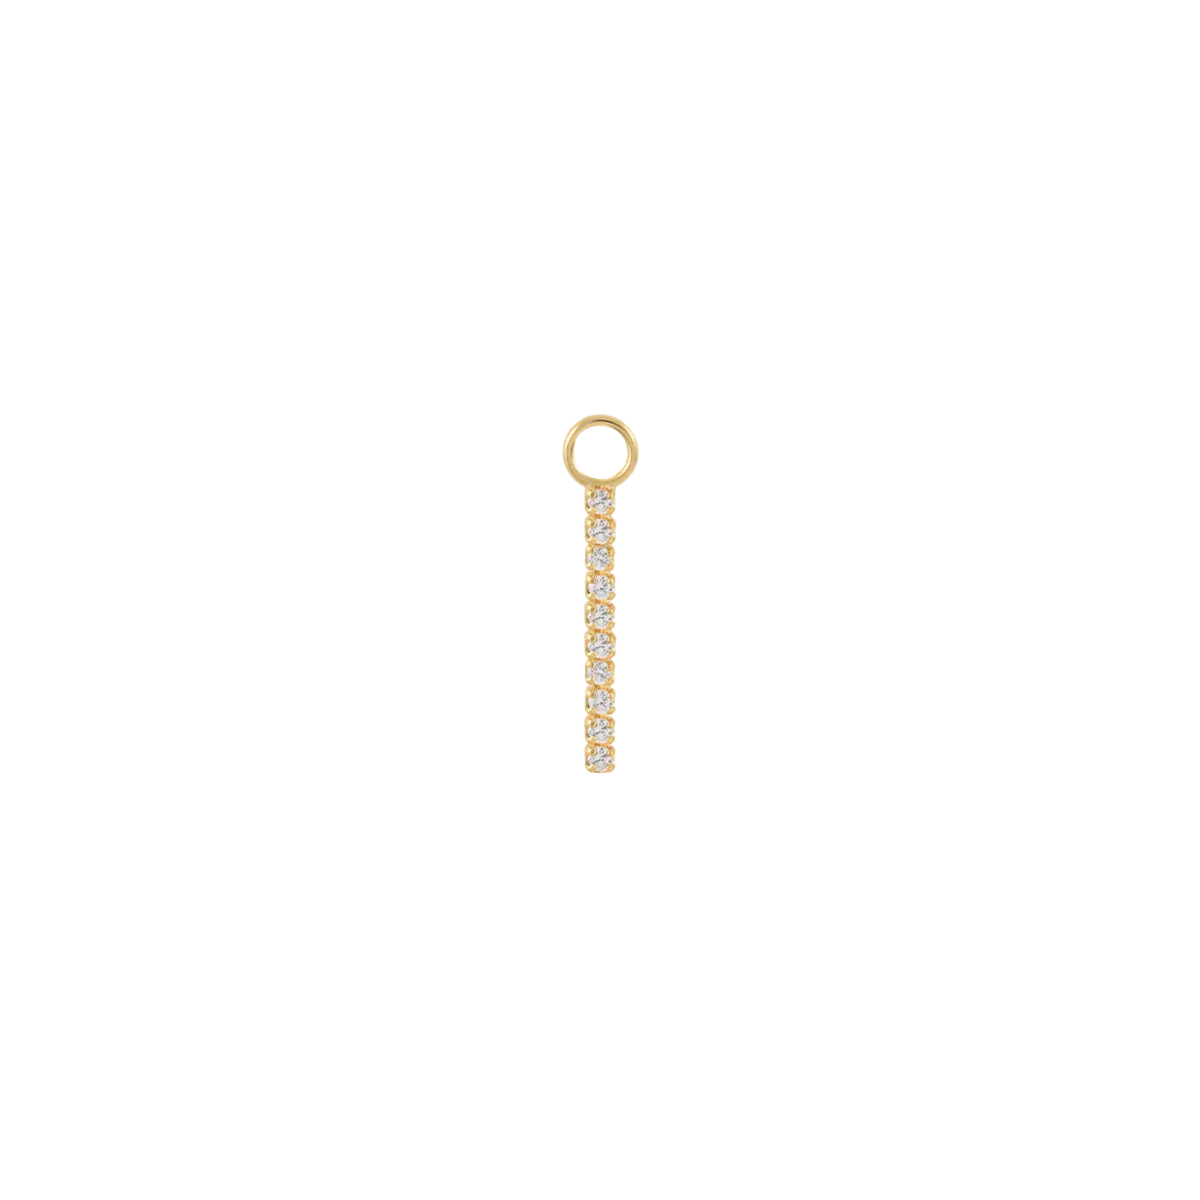 Elodie 18k Gold Plated Earring Charm